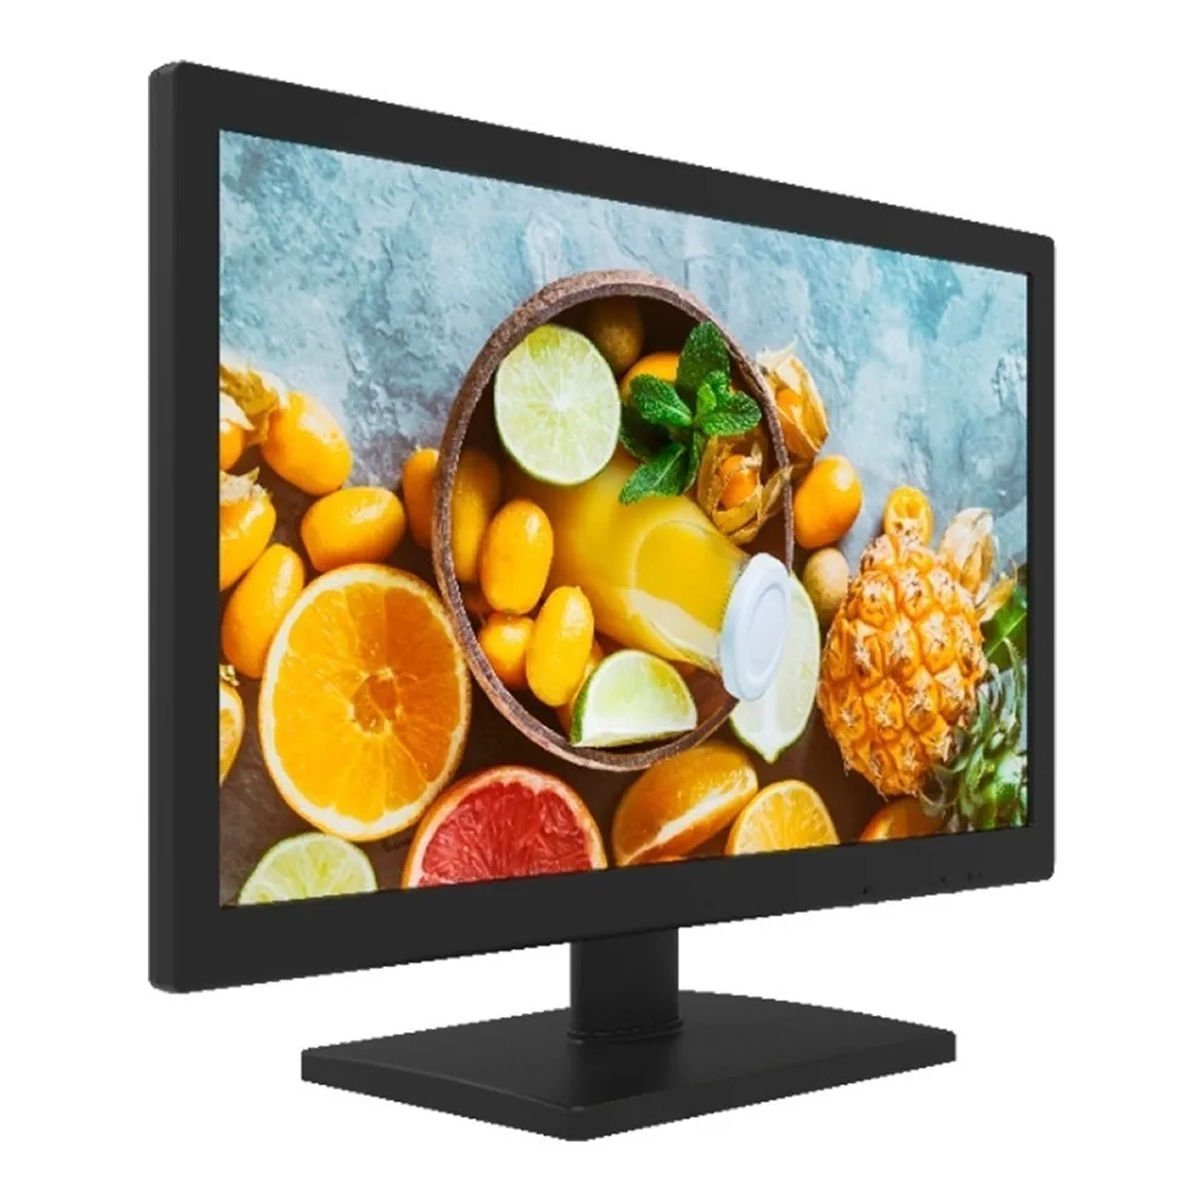 MONITOR HIKVISION DS-D5019QE-B 19"